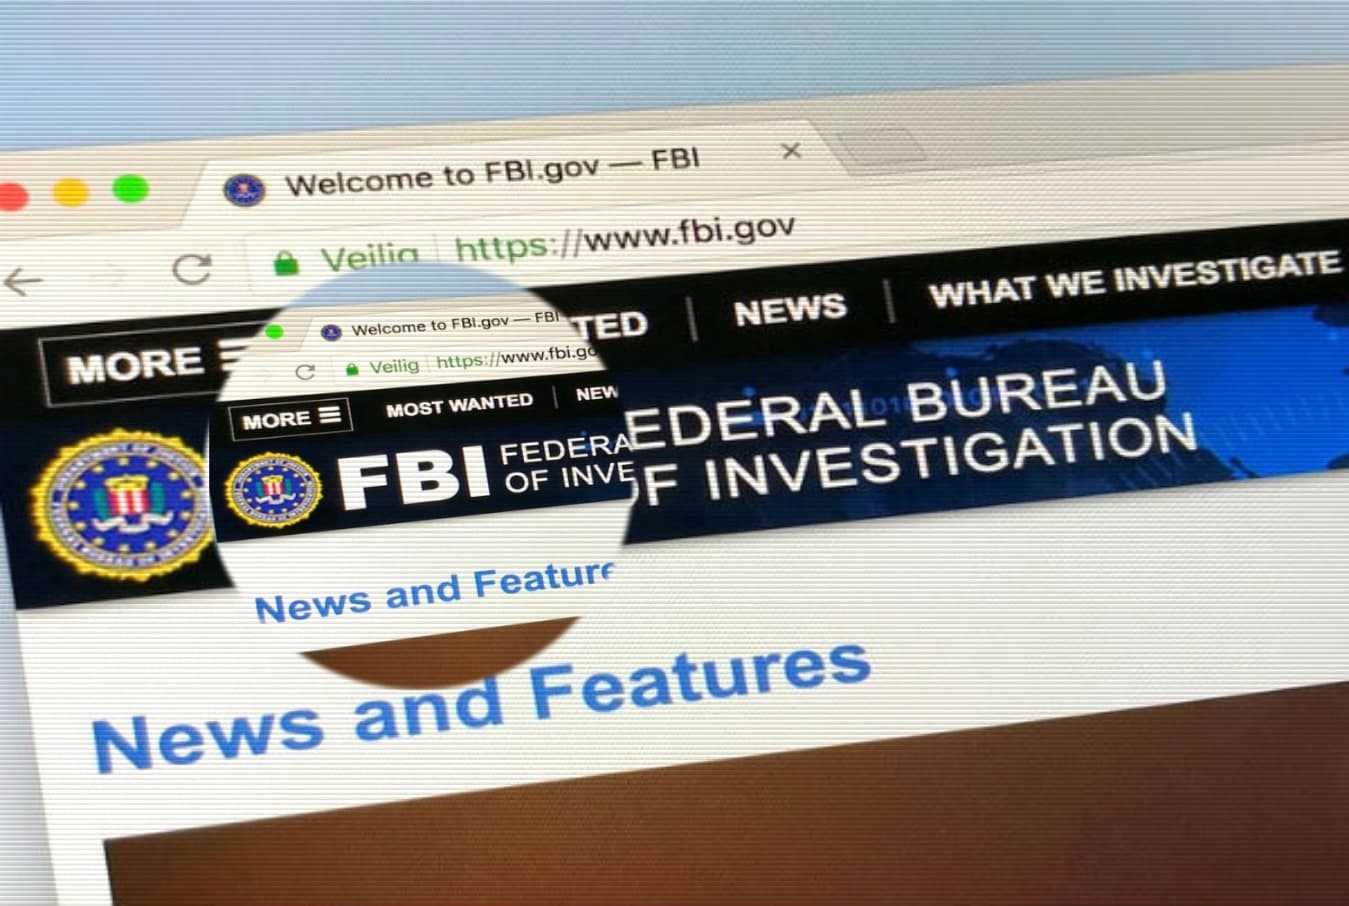 Private Information of Thousands of Federal Agents Posted Online after FBI-linked Websites Hacked